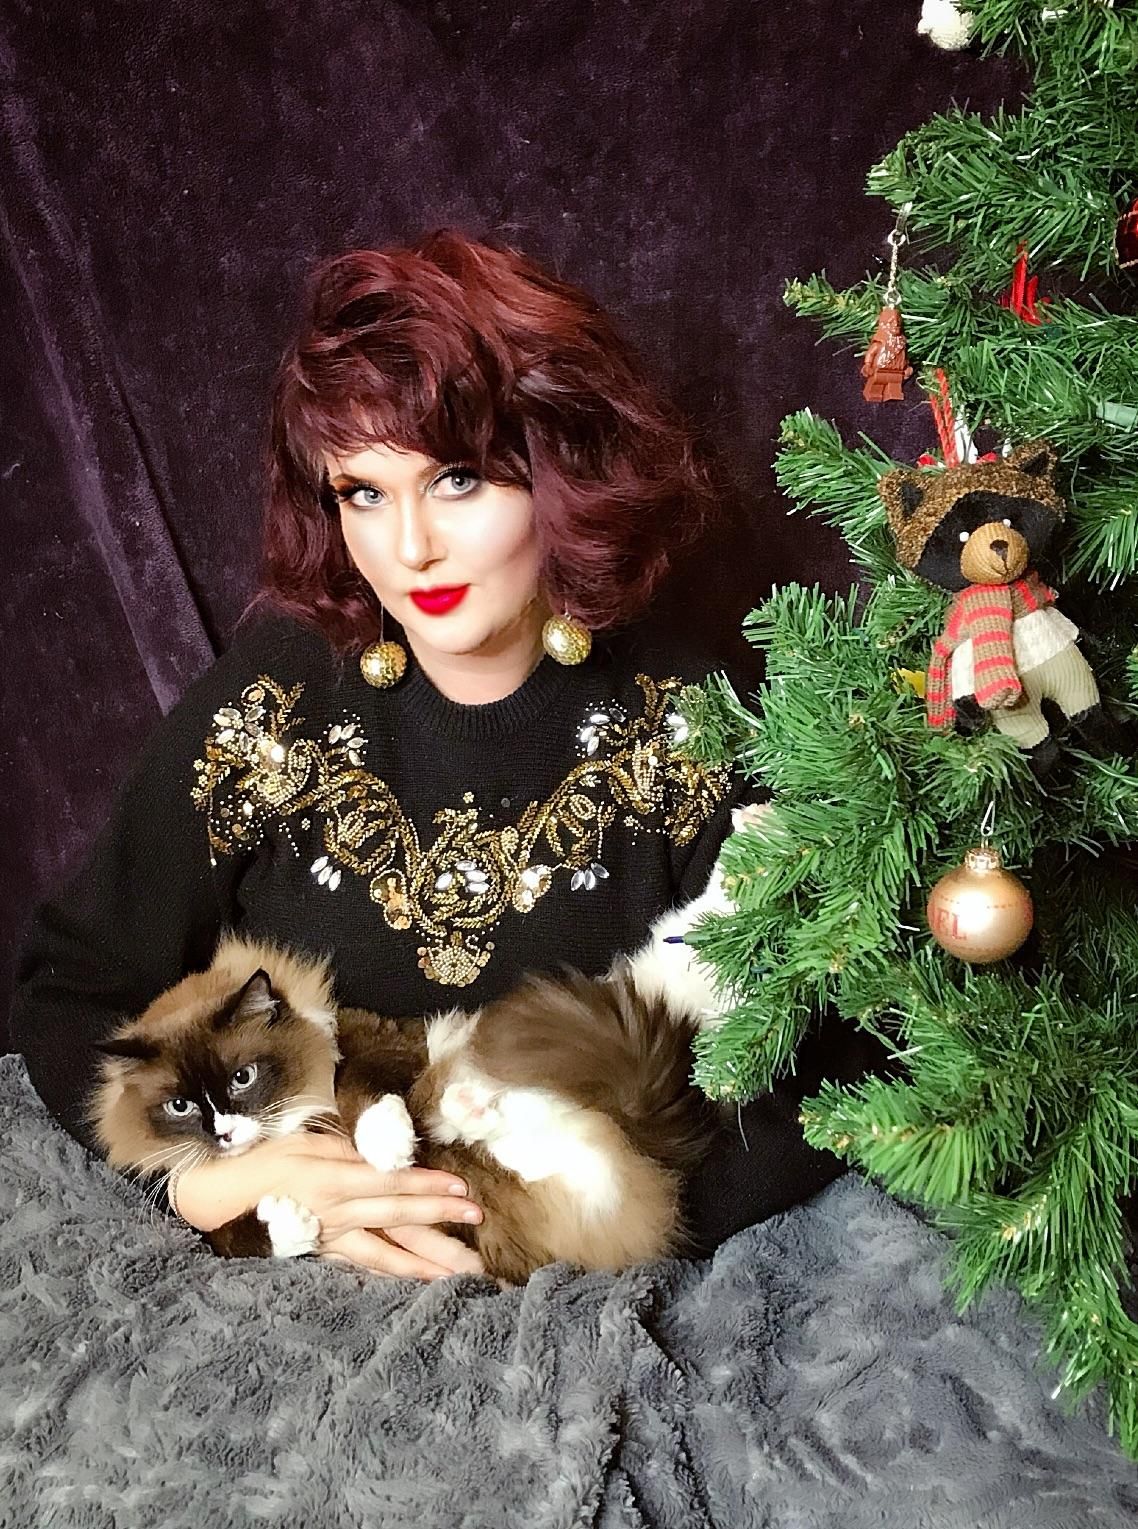 This year I took 80s glamour photos for my Christmas cards